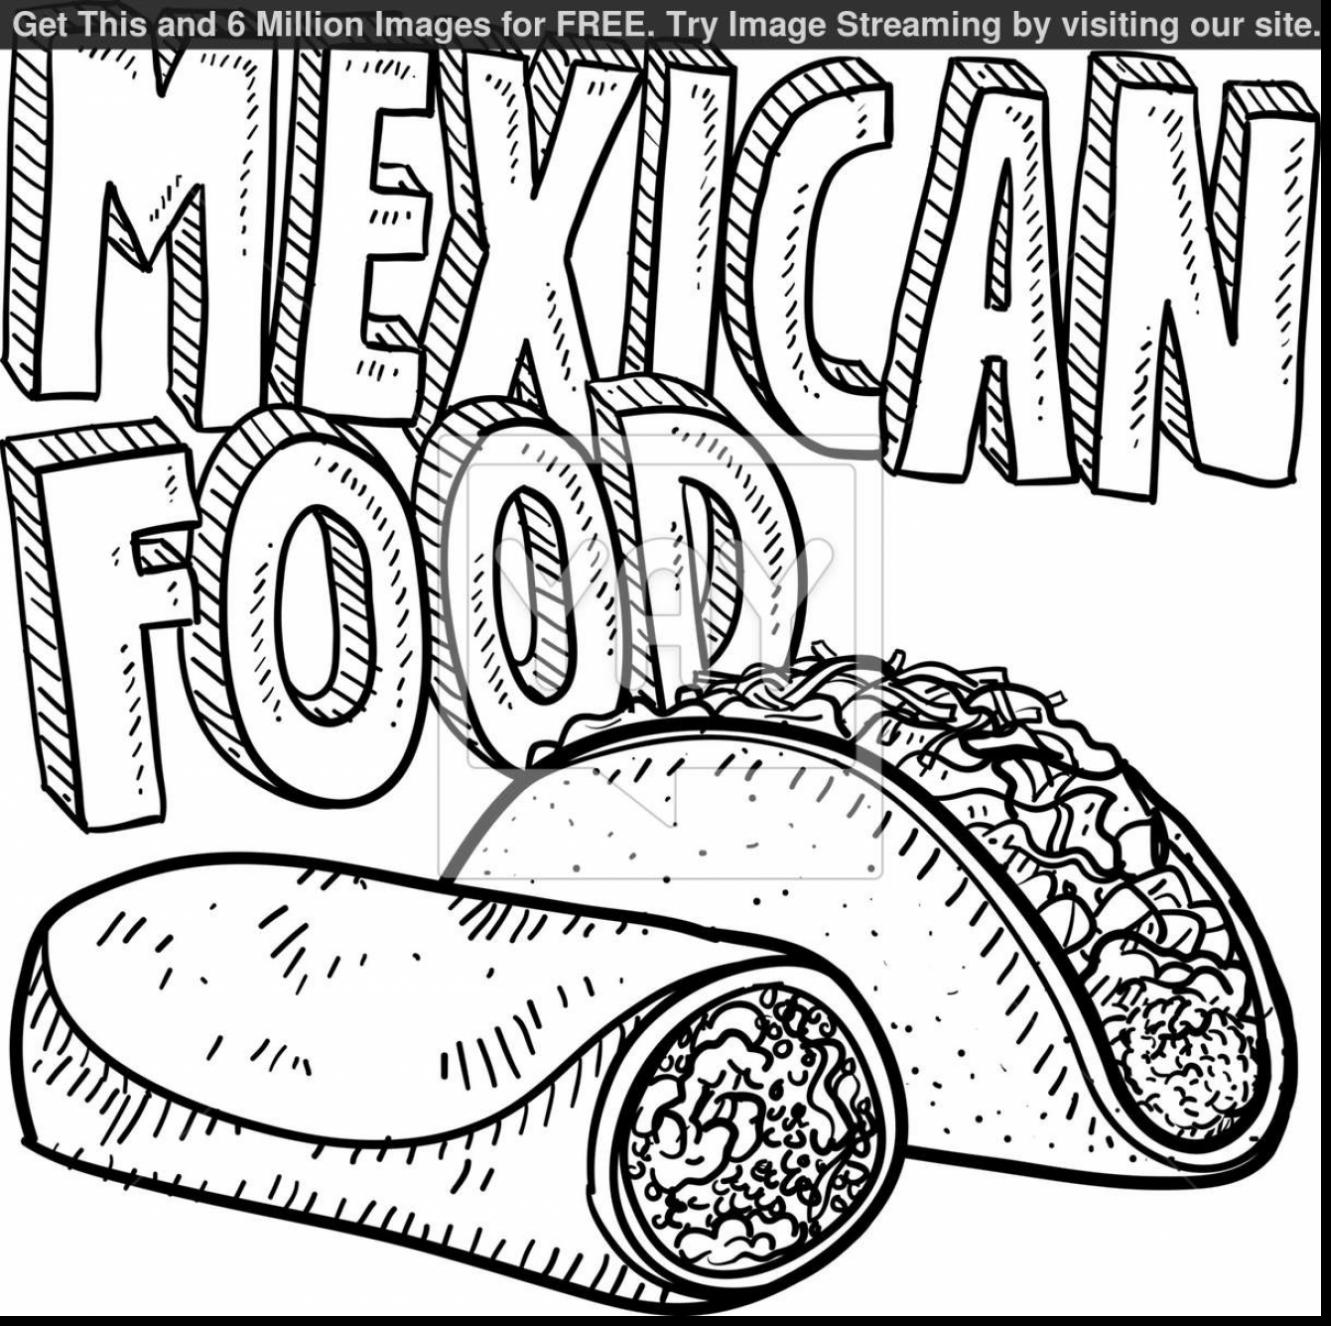 Mexico Coloring Pages at Free printable colorings